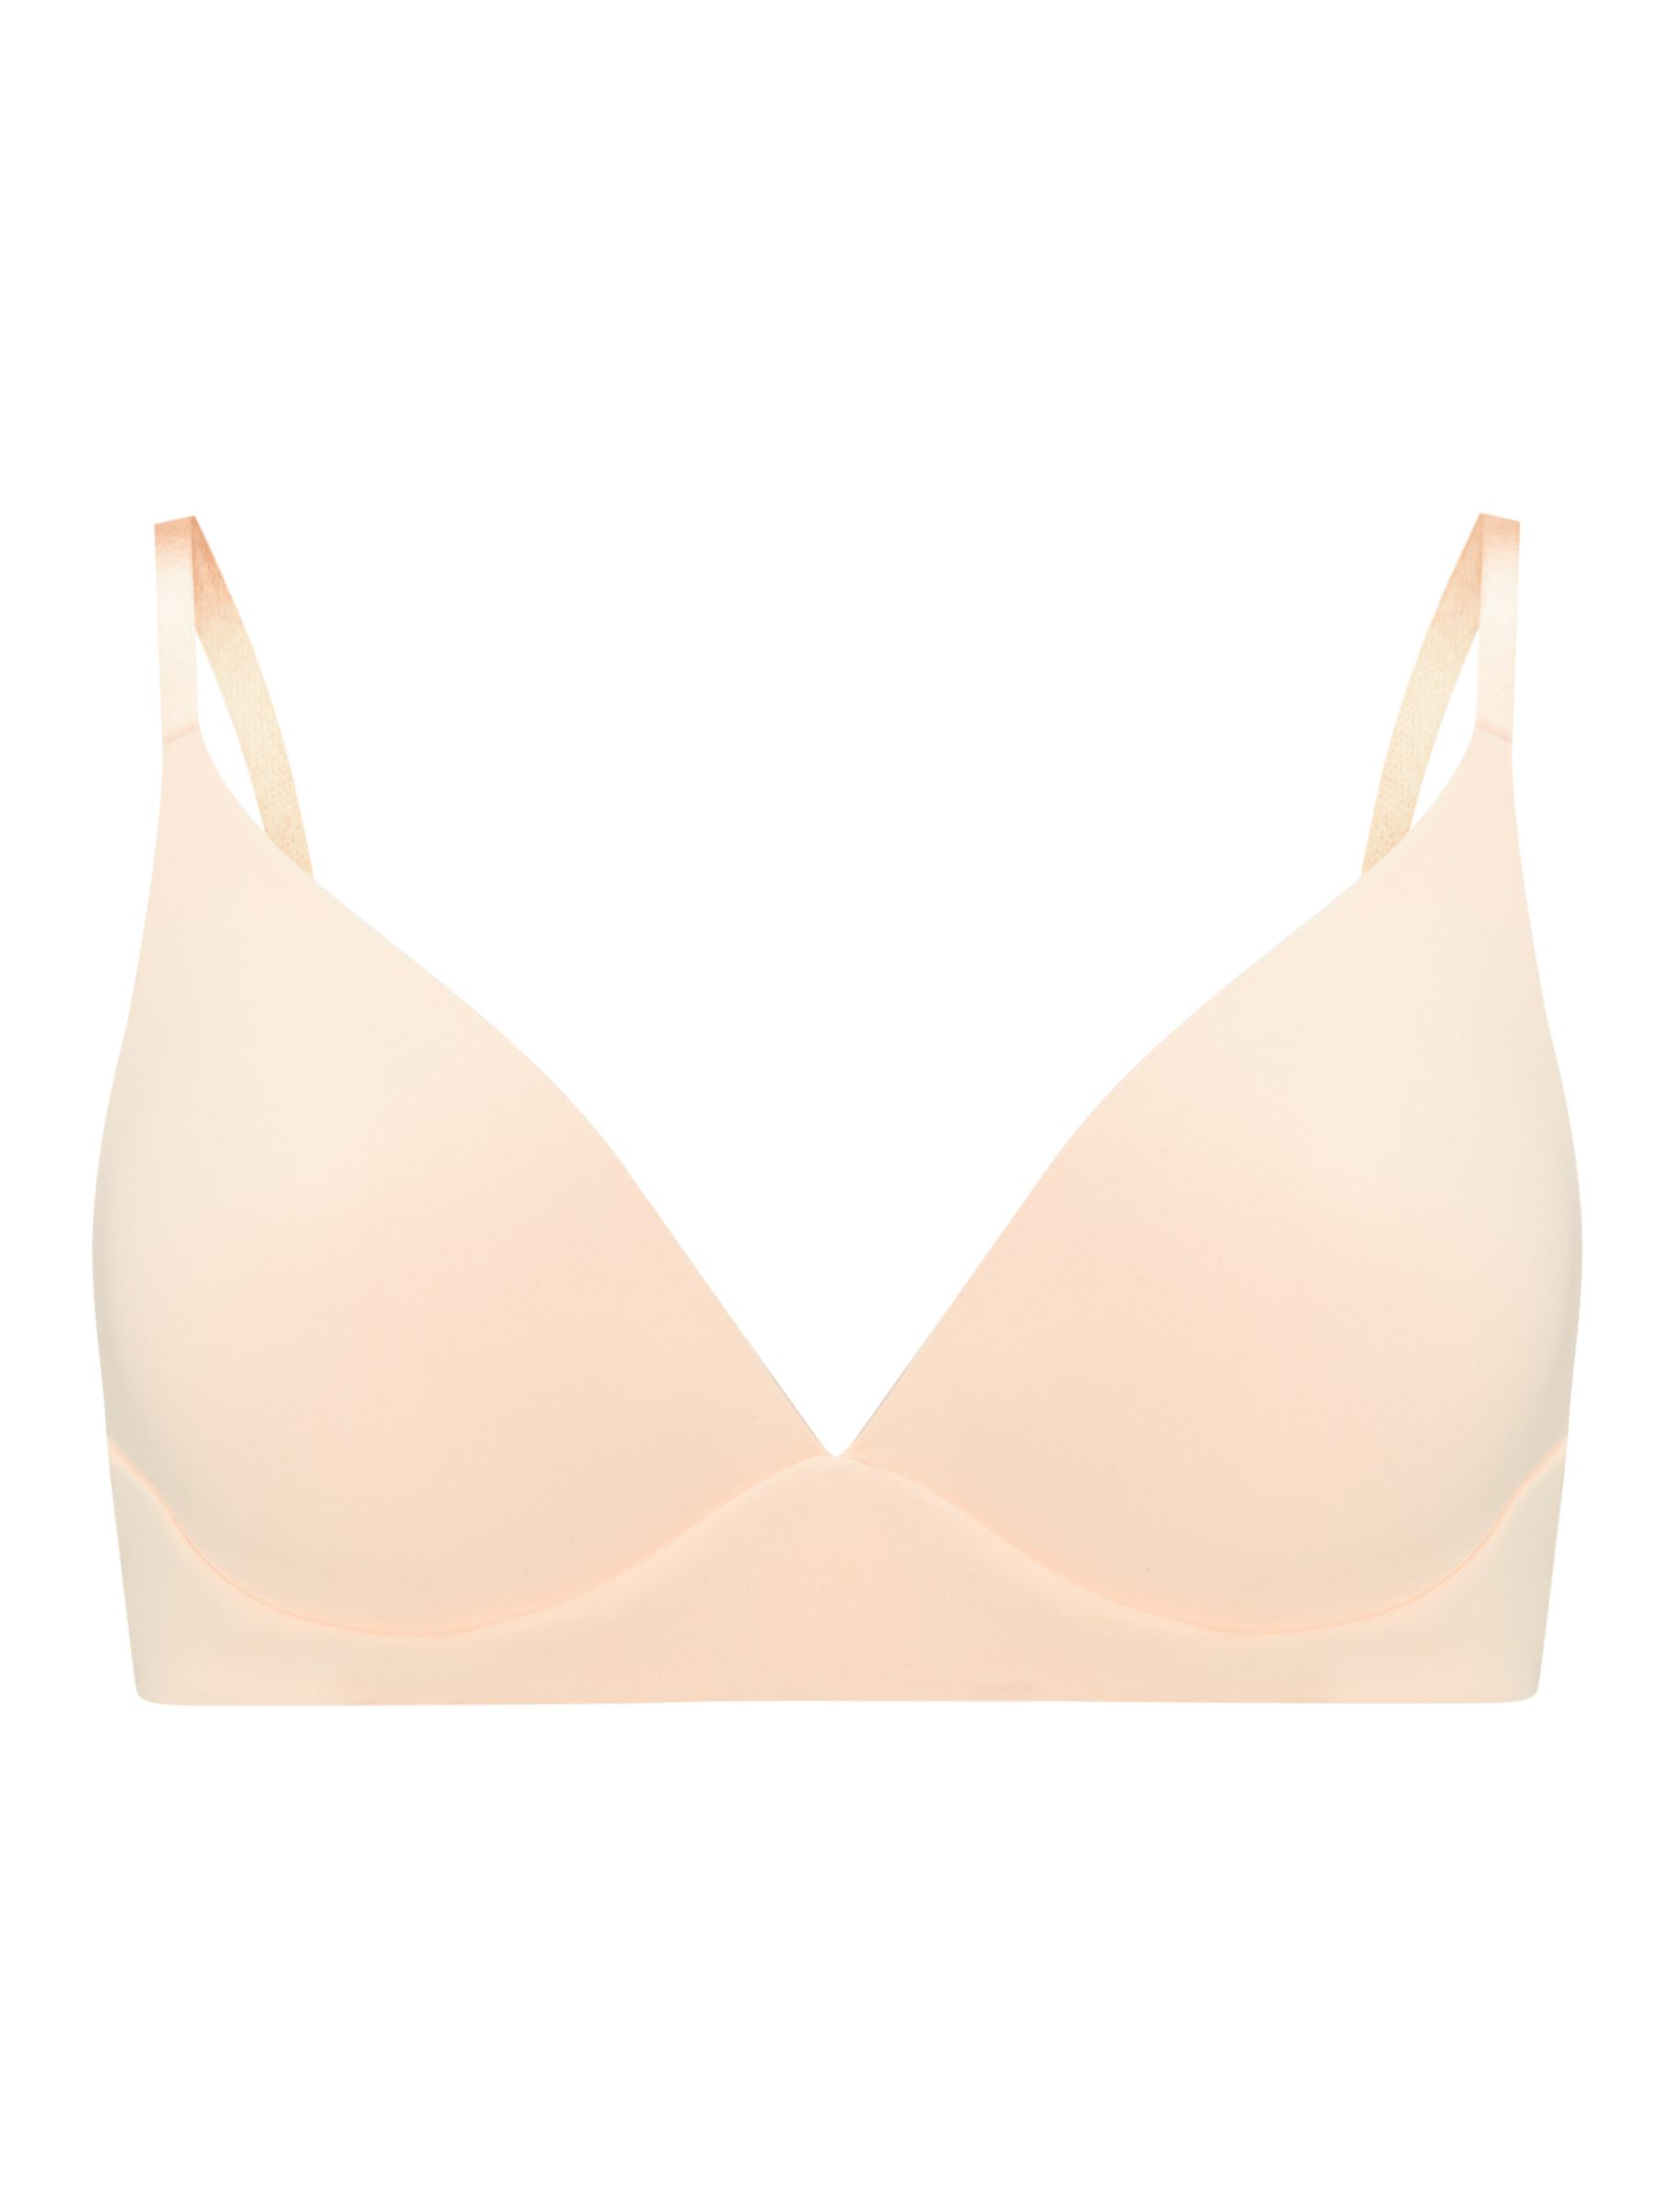 NEW JOHN LEWIS & Partners Willow Non-Wired Bra 32B Pink £3.50